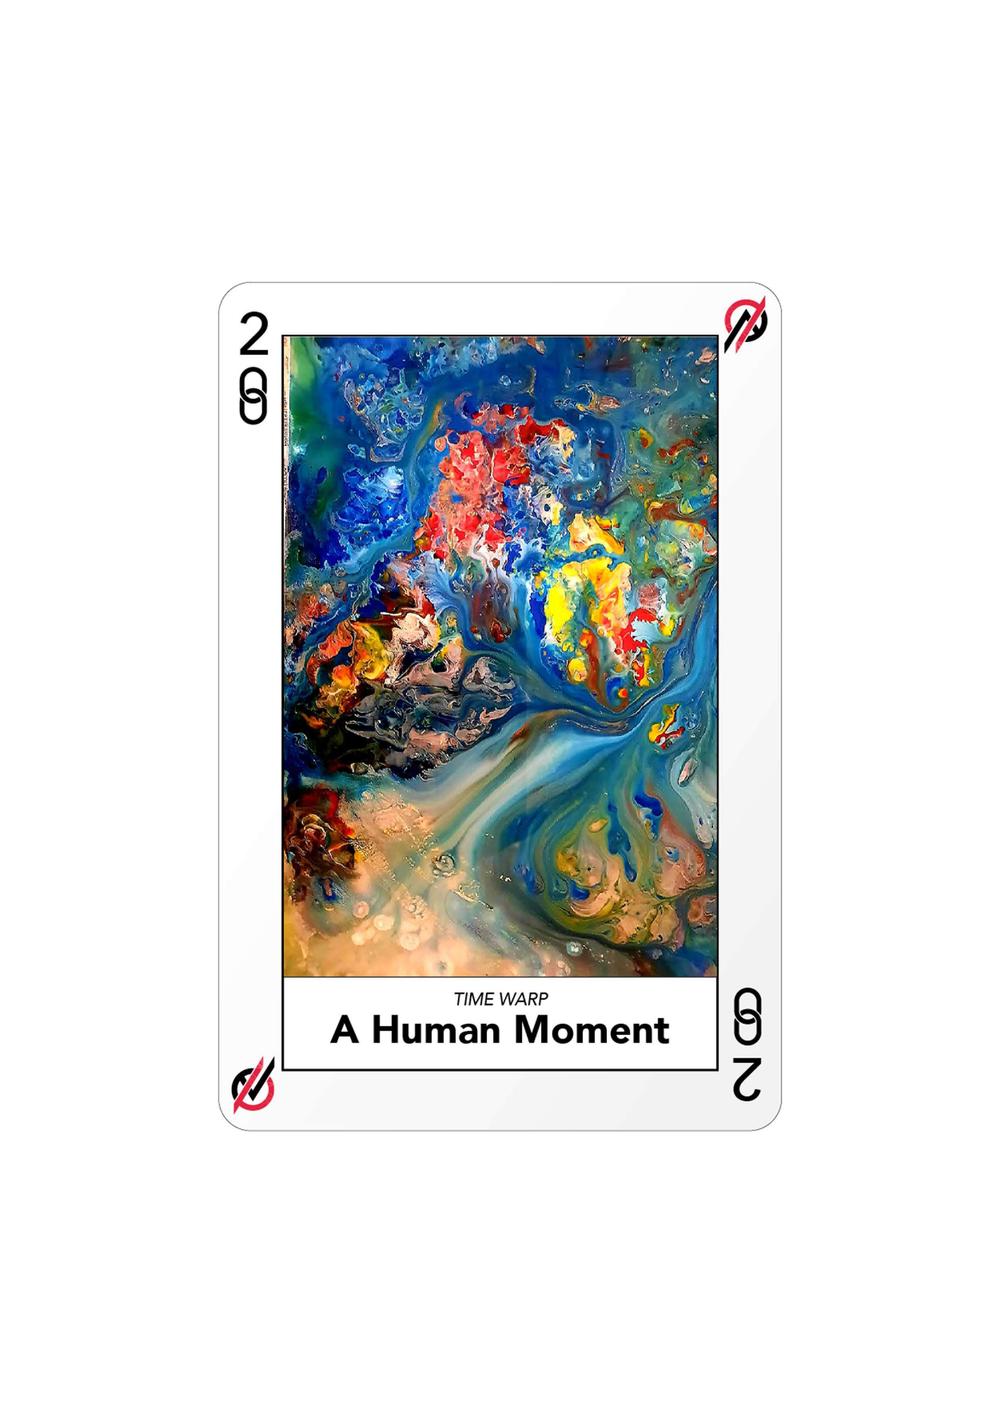 Certificate of Authenticity and Consignment - A Human Moment